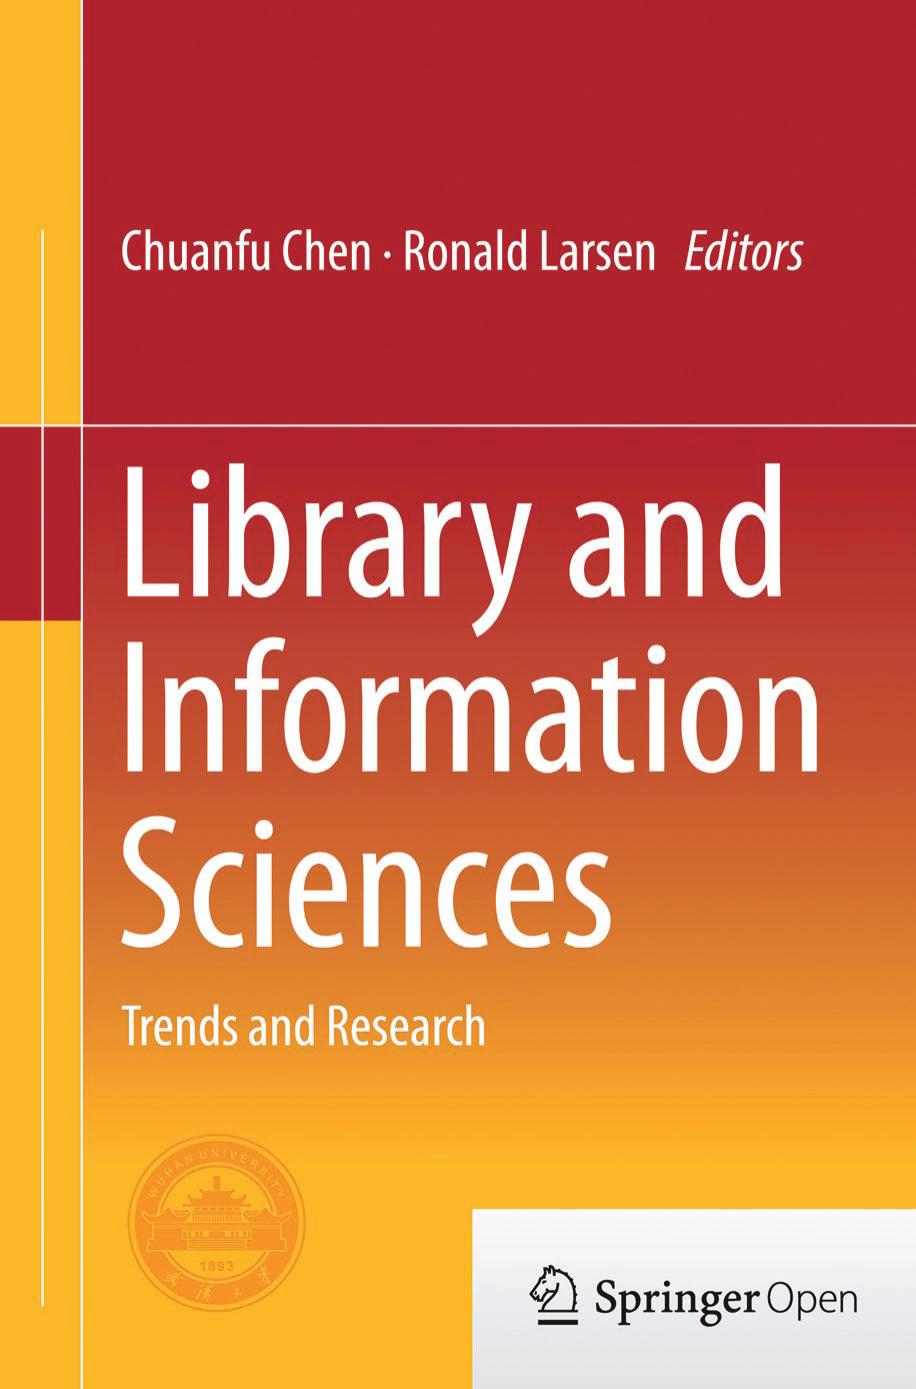 Library and Information Sciences by Chuanfu Chen & Ronald Larsen